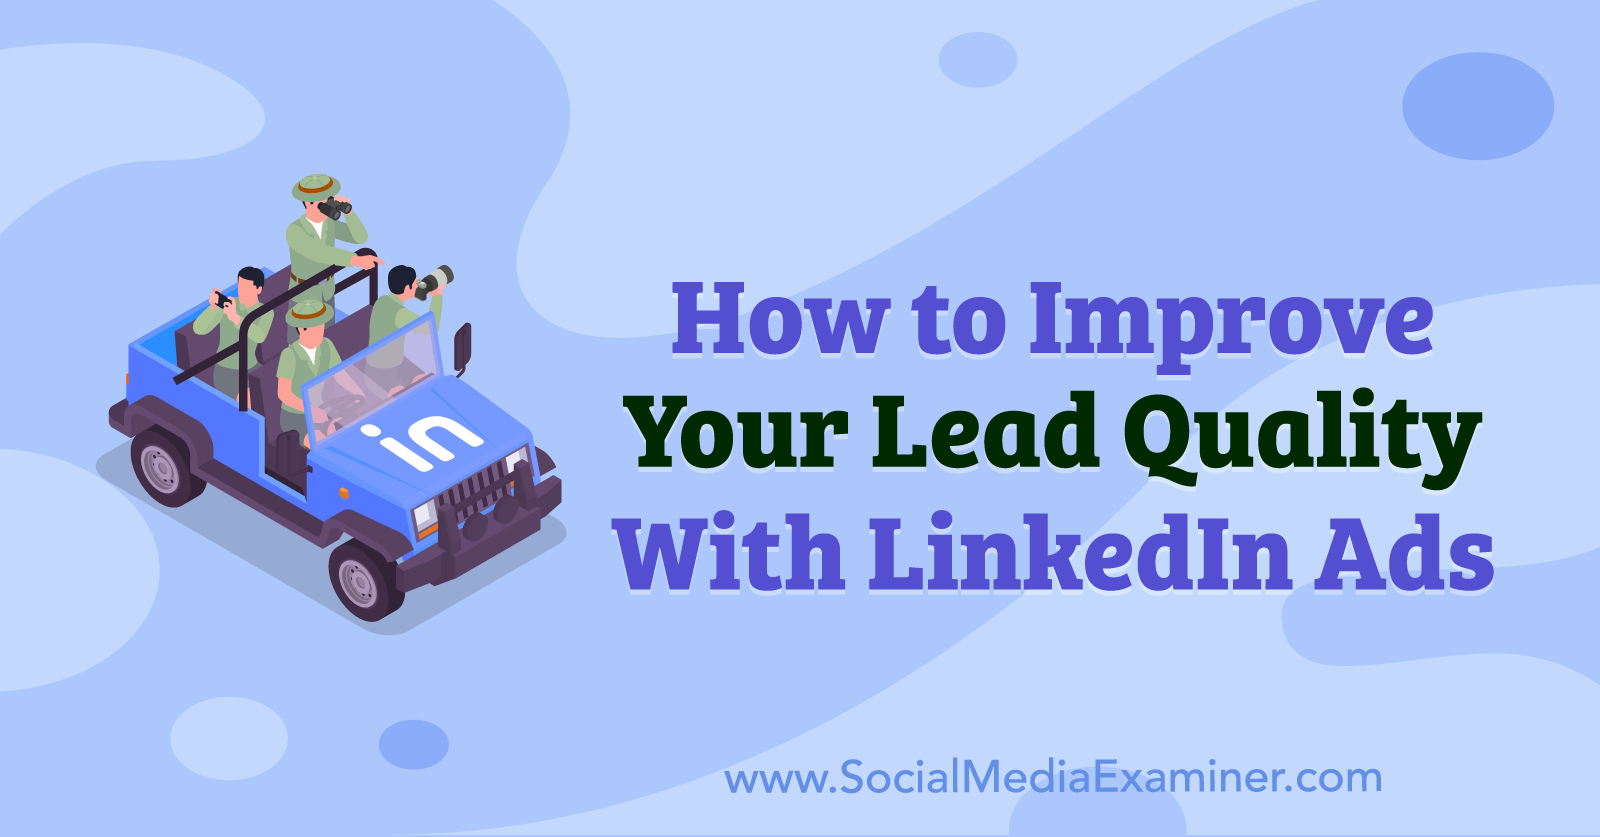 How to Improve Your Lead Quality With LinkedIn Ads by Anna Sonnenberg